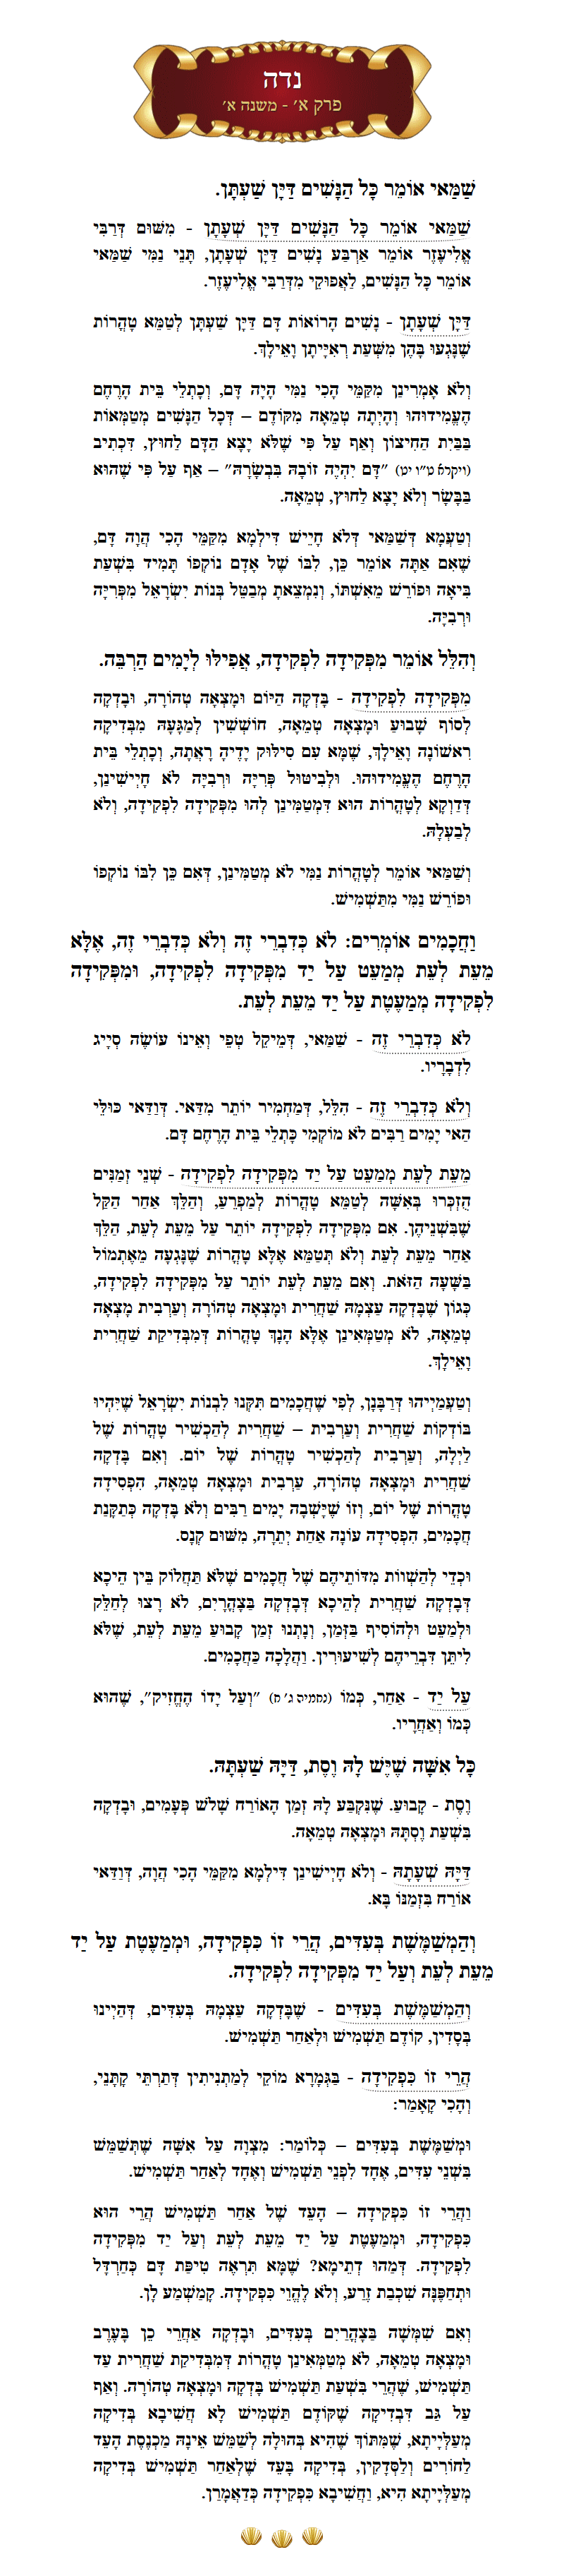 Masechta Niddah Chapter 1 Mishnah 1 with commentary